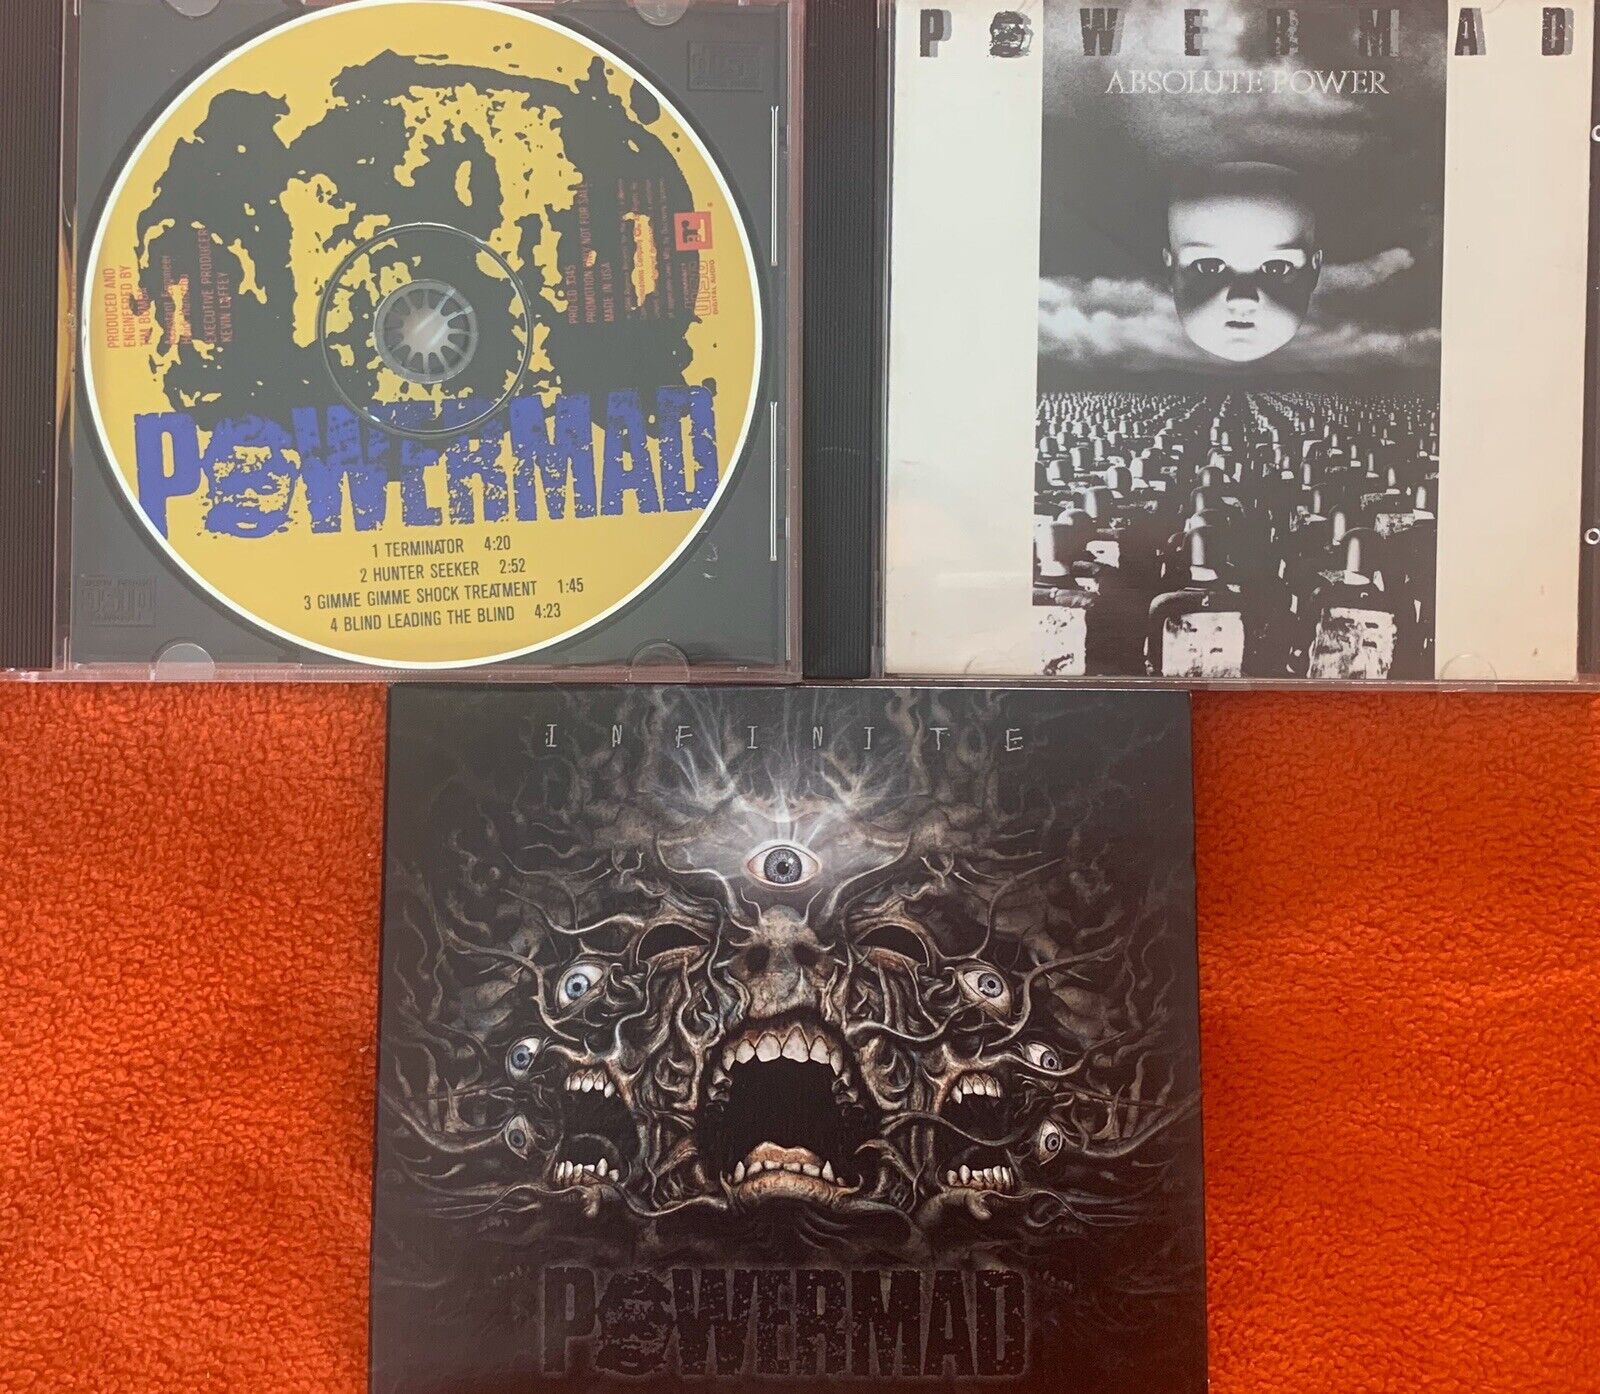 Powermad- The Madness Begins... • Absolute Power • Infinite (3 CD Lot) Toxik